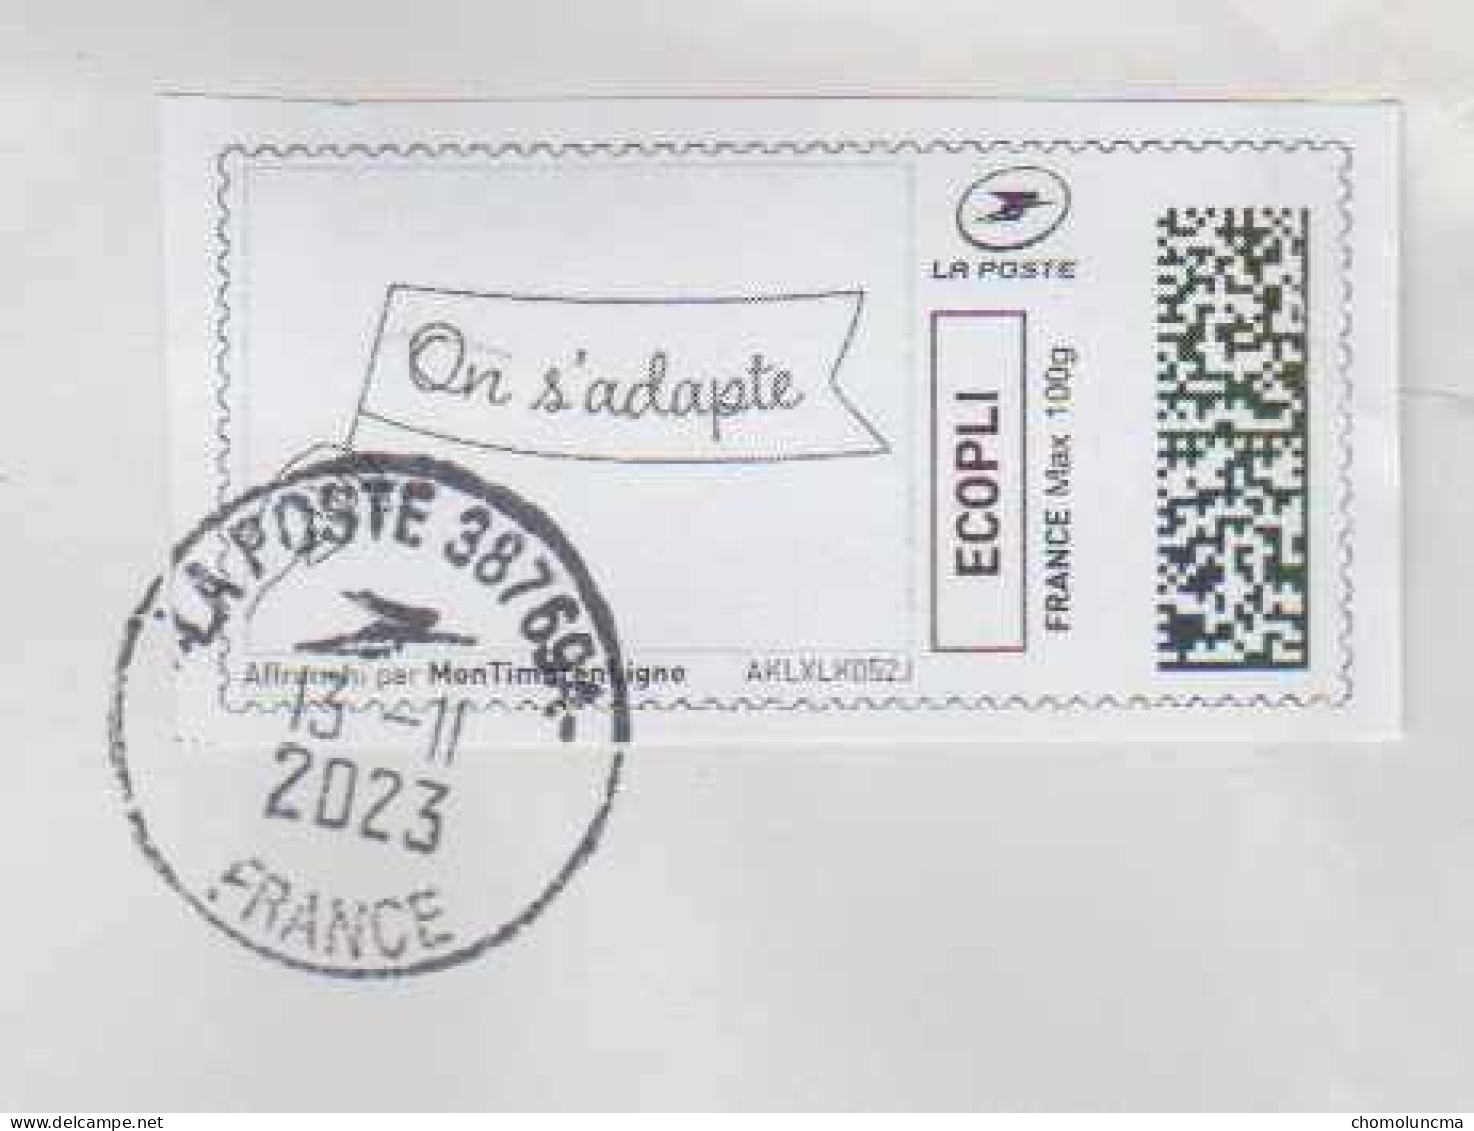 Montimbrenligne On S' Adapte Timbre Imprimé Post Office Printed Stamp Pli Courrier Cover Lettre Ecopli 100g Letter - Sellos Imprimibles (Montimbrenligne)